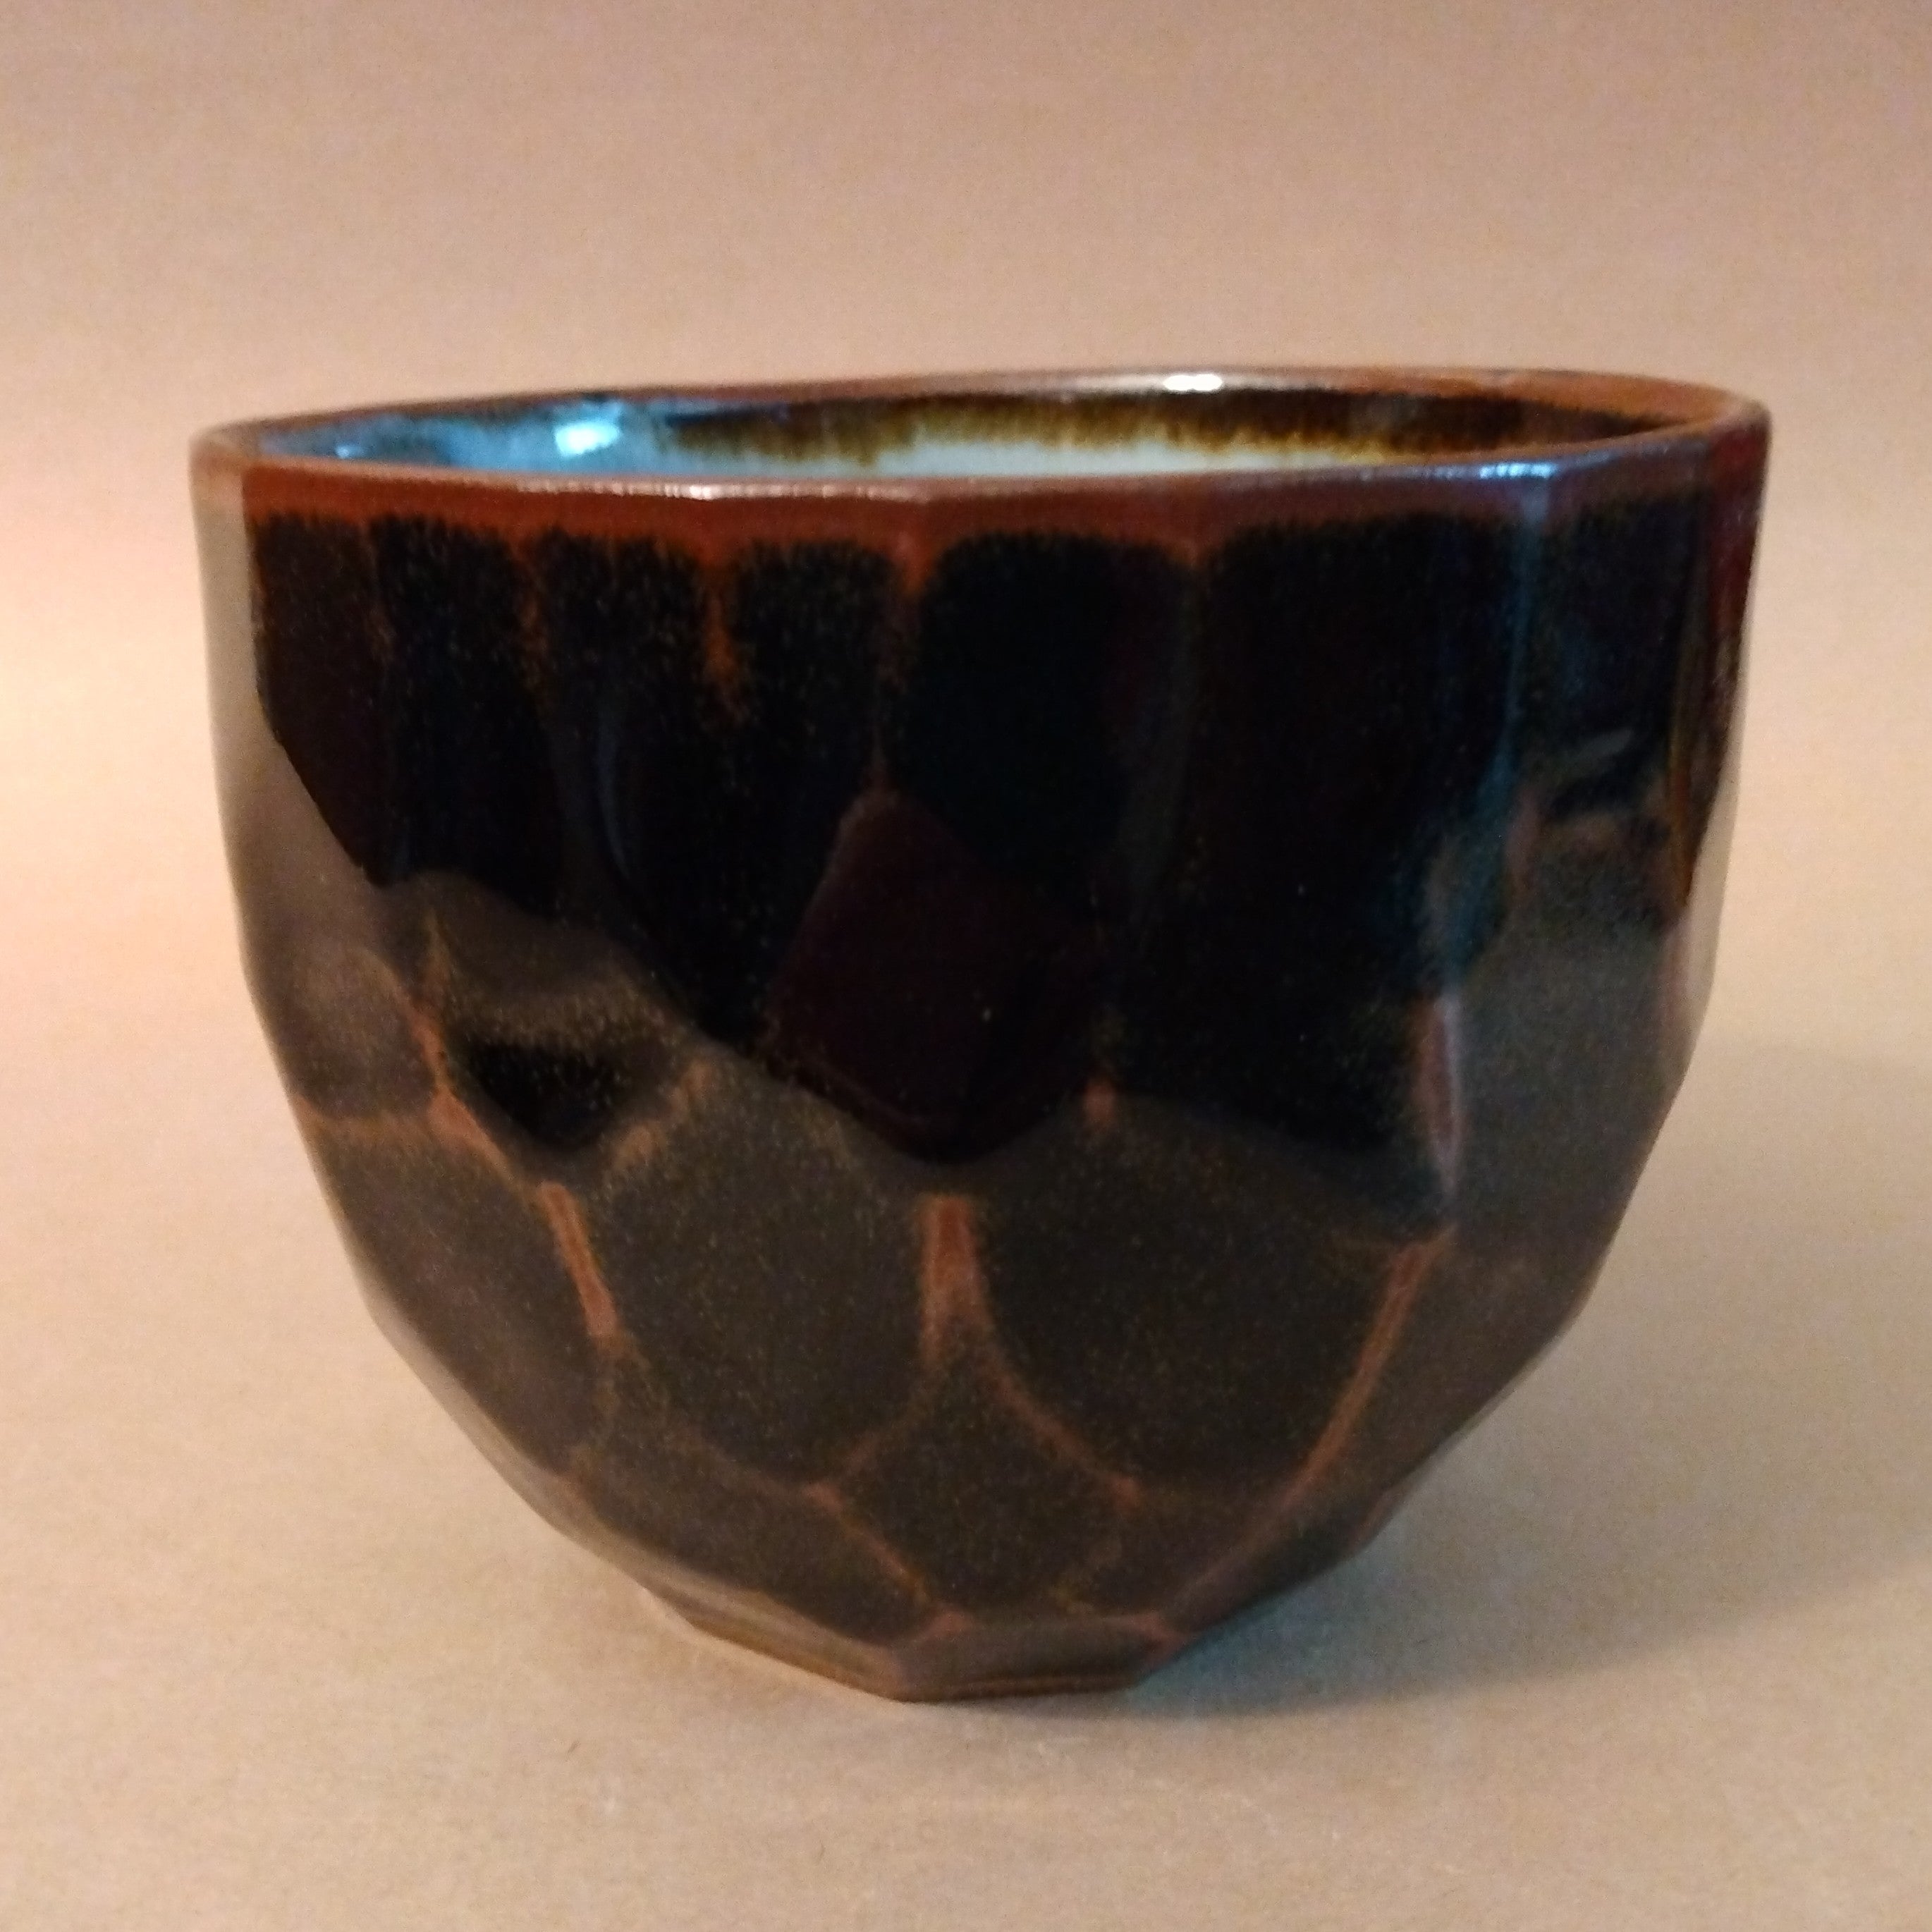 Faceted Matcha Chawan (Tea Bowl) with Tenmoku Glaze, Unknown Potter, Vintage; Thiel Collection